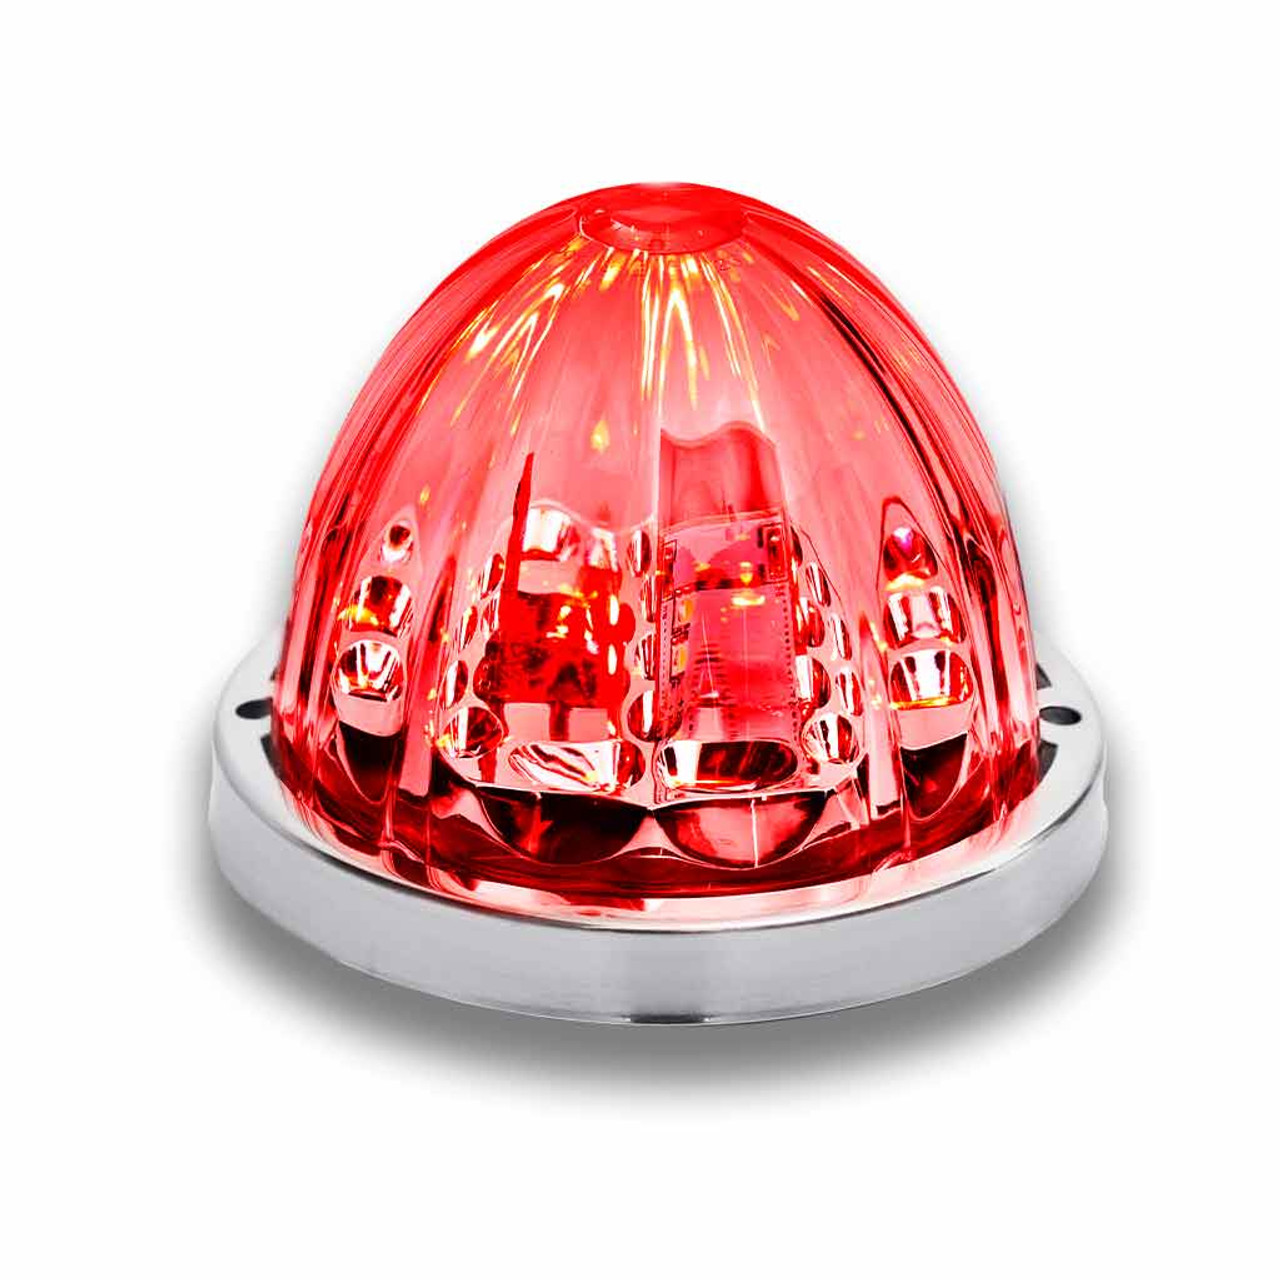 Star Burst Watermelon Light - Clear Red (19 Diodes)